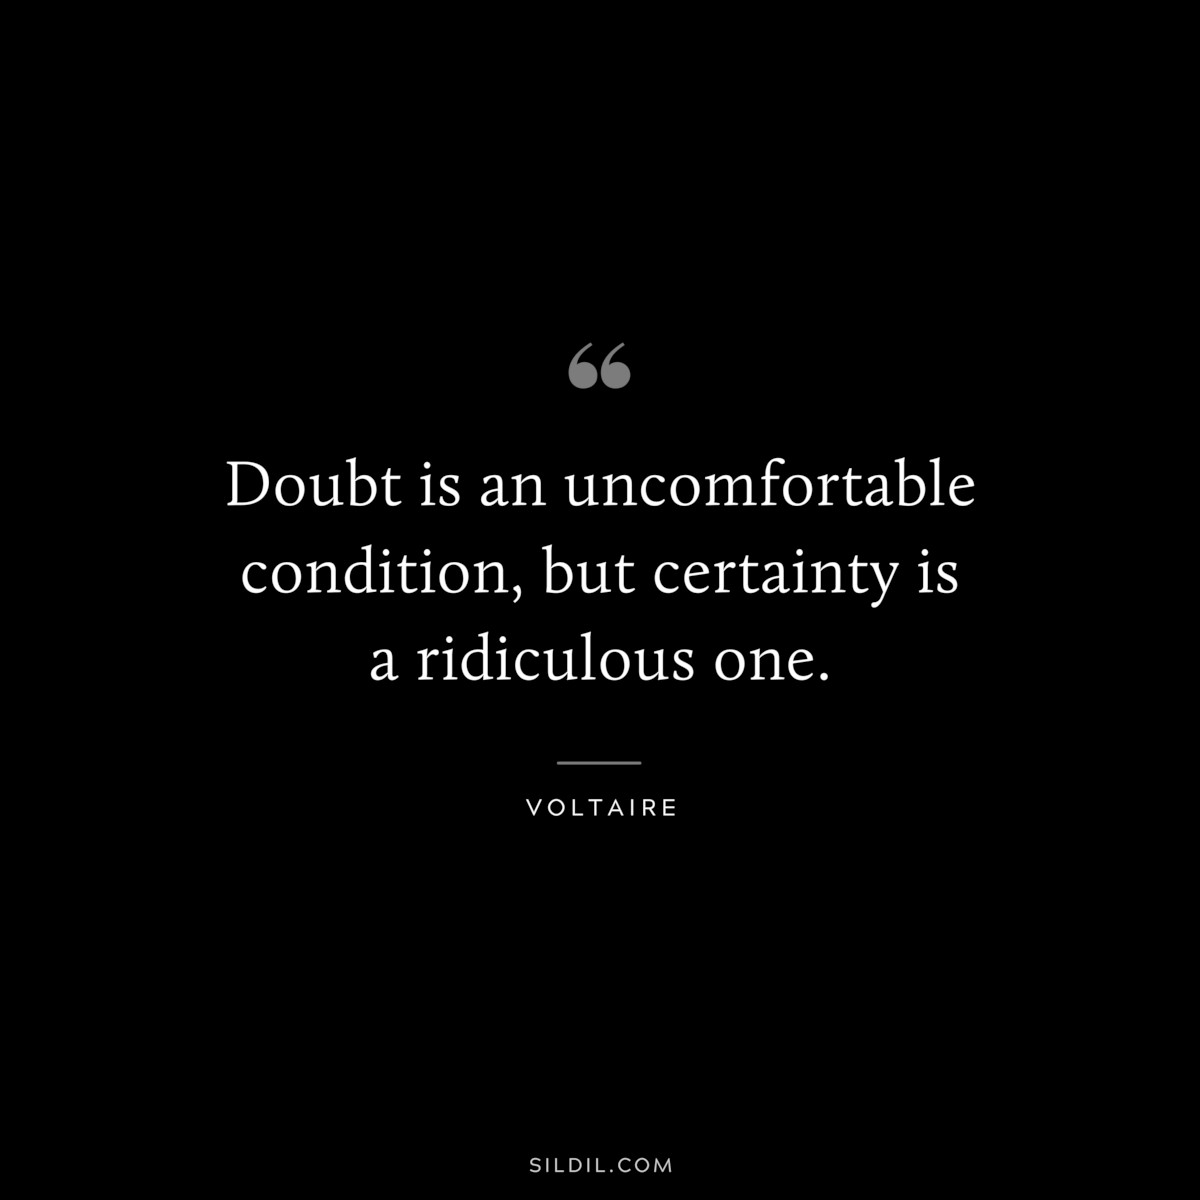 Doubt is an uncomfortable condition, but certainty is a ridiculous one. ― Voltaire